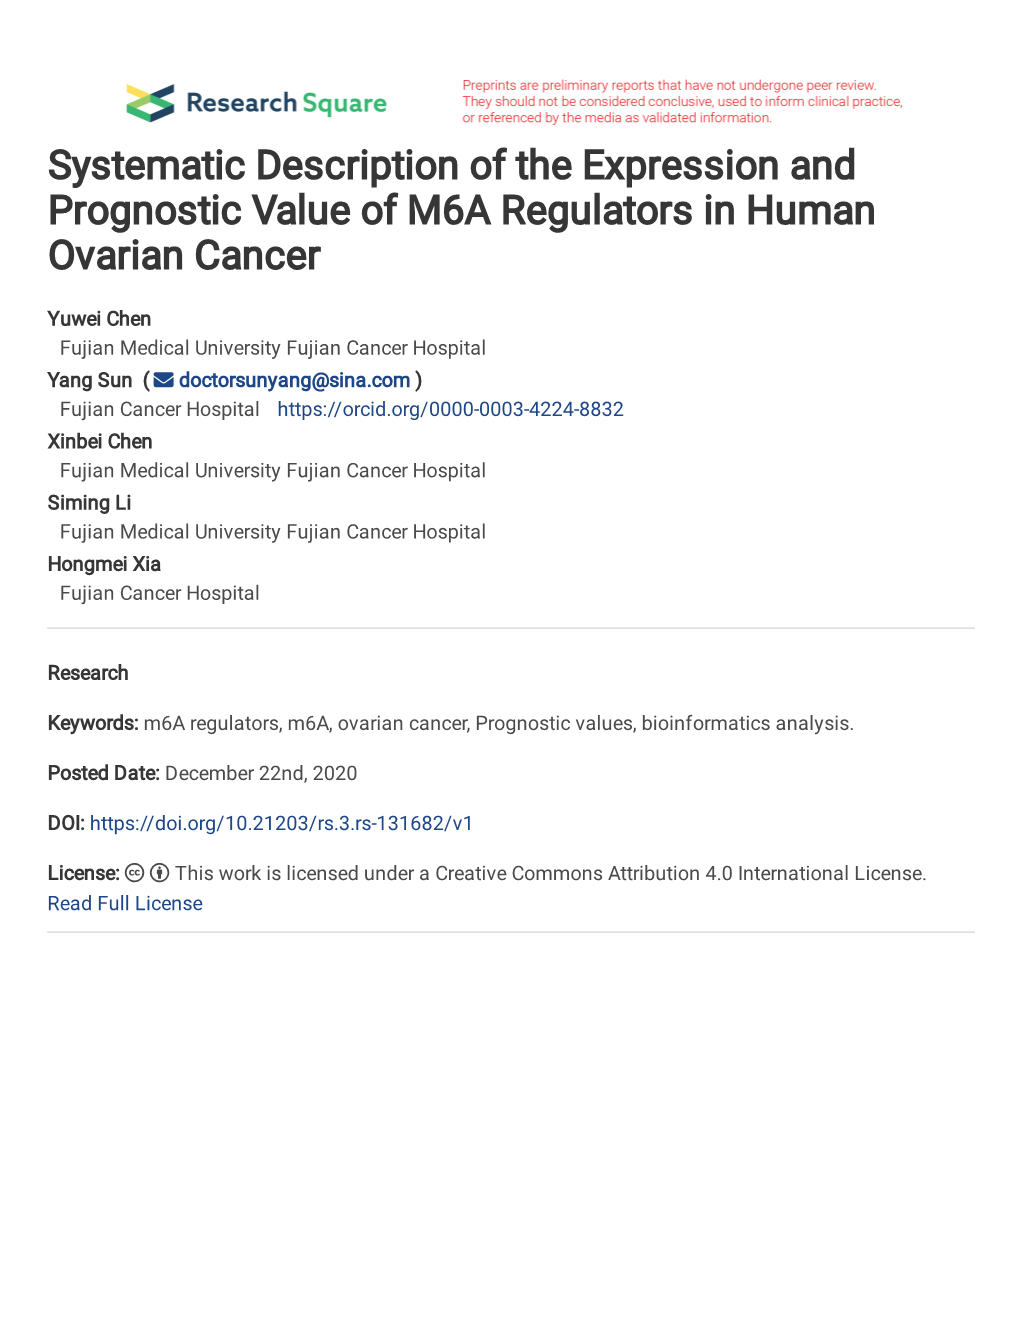 Systematic Description of the Expression and Prognostic Value of M6A Regulators in Human Ovarian Cancer